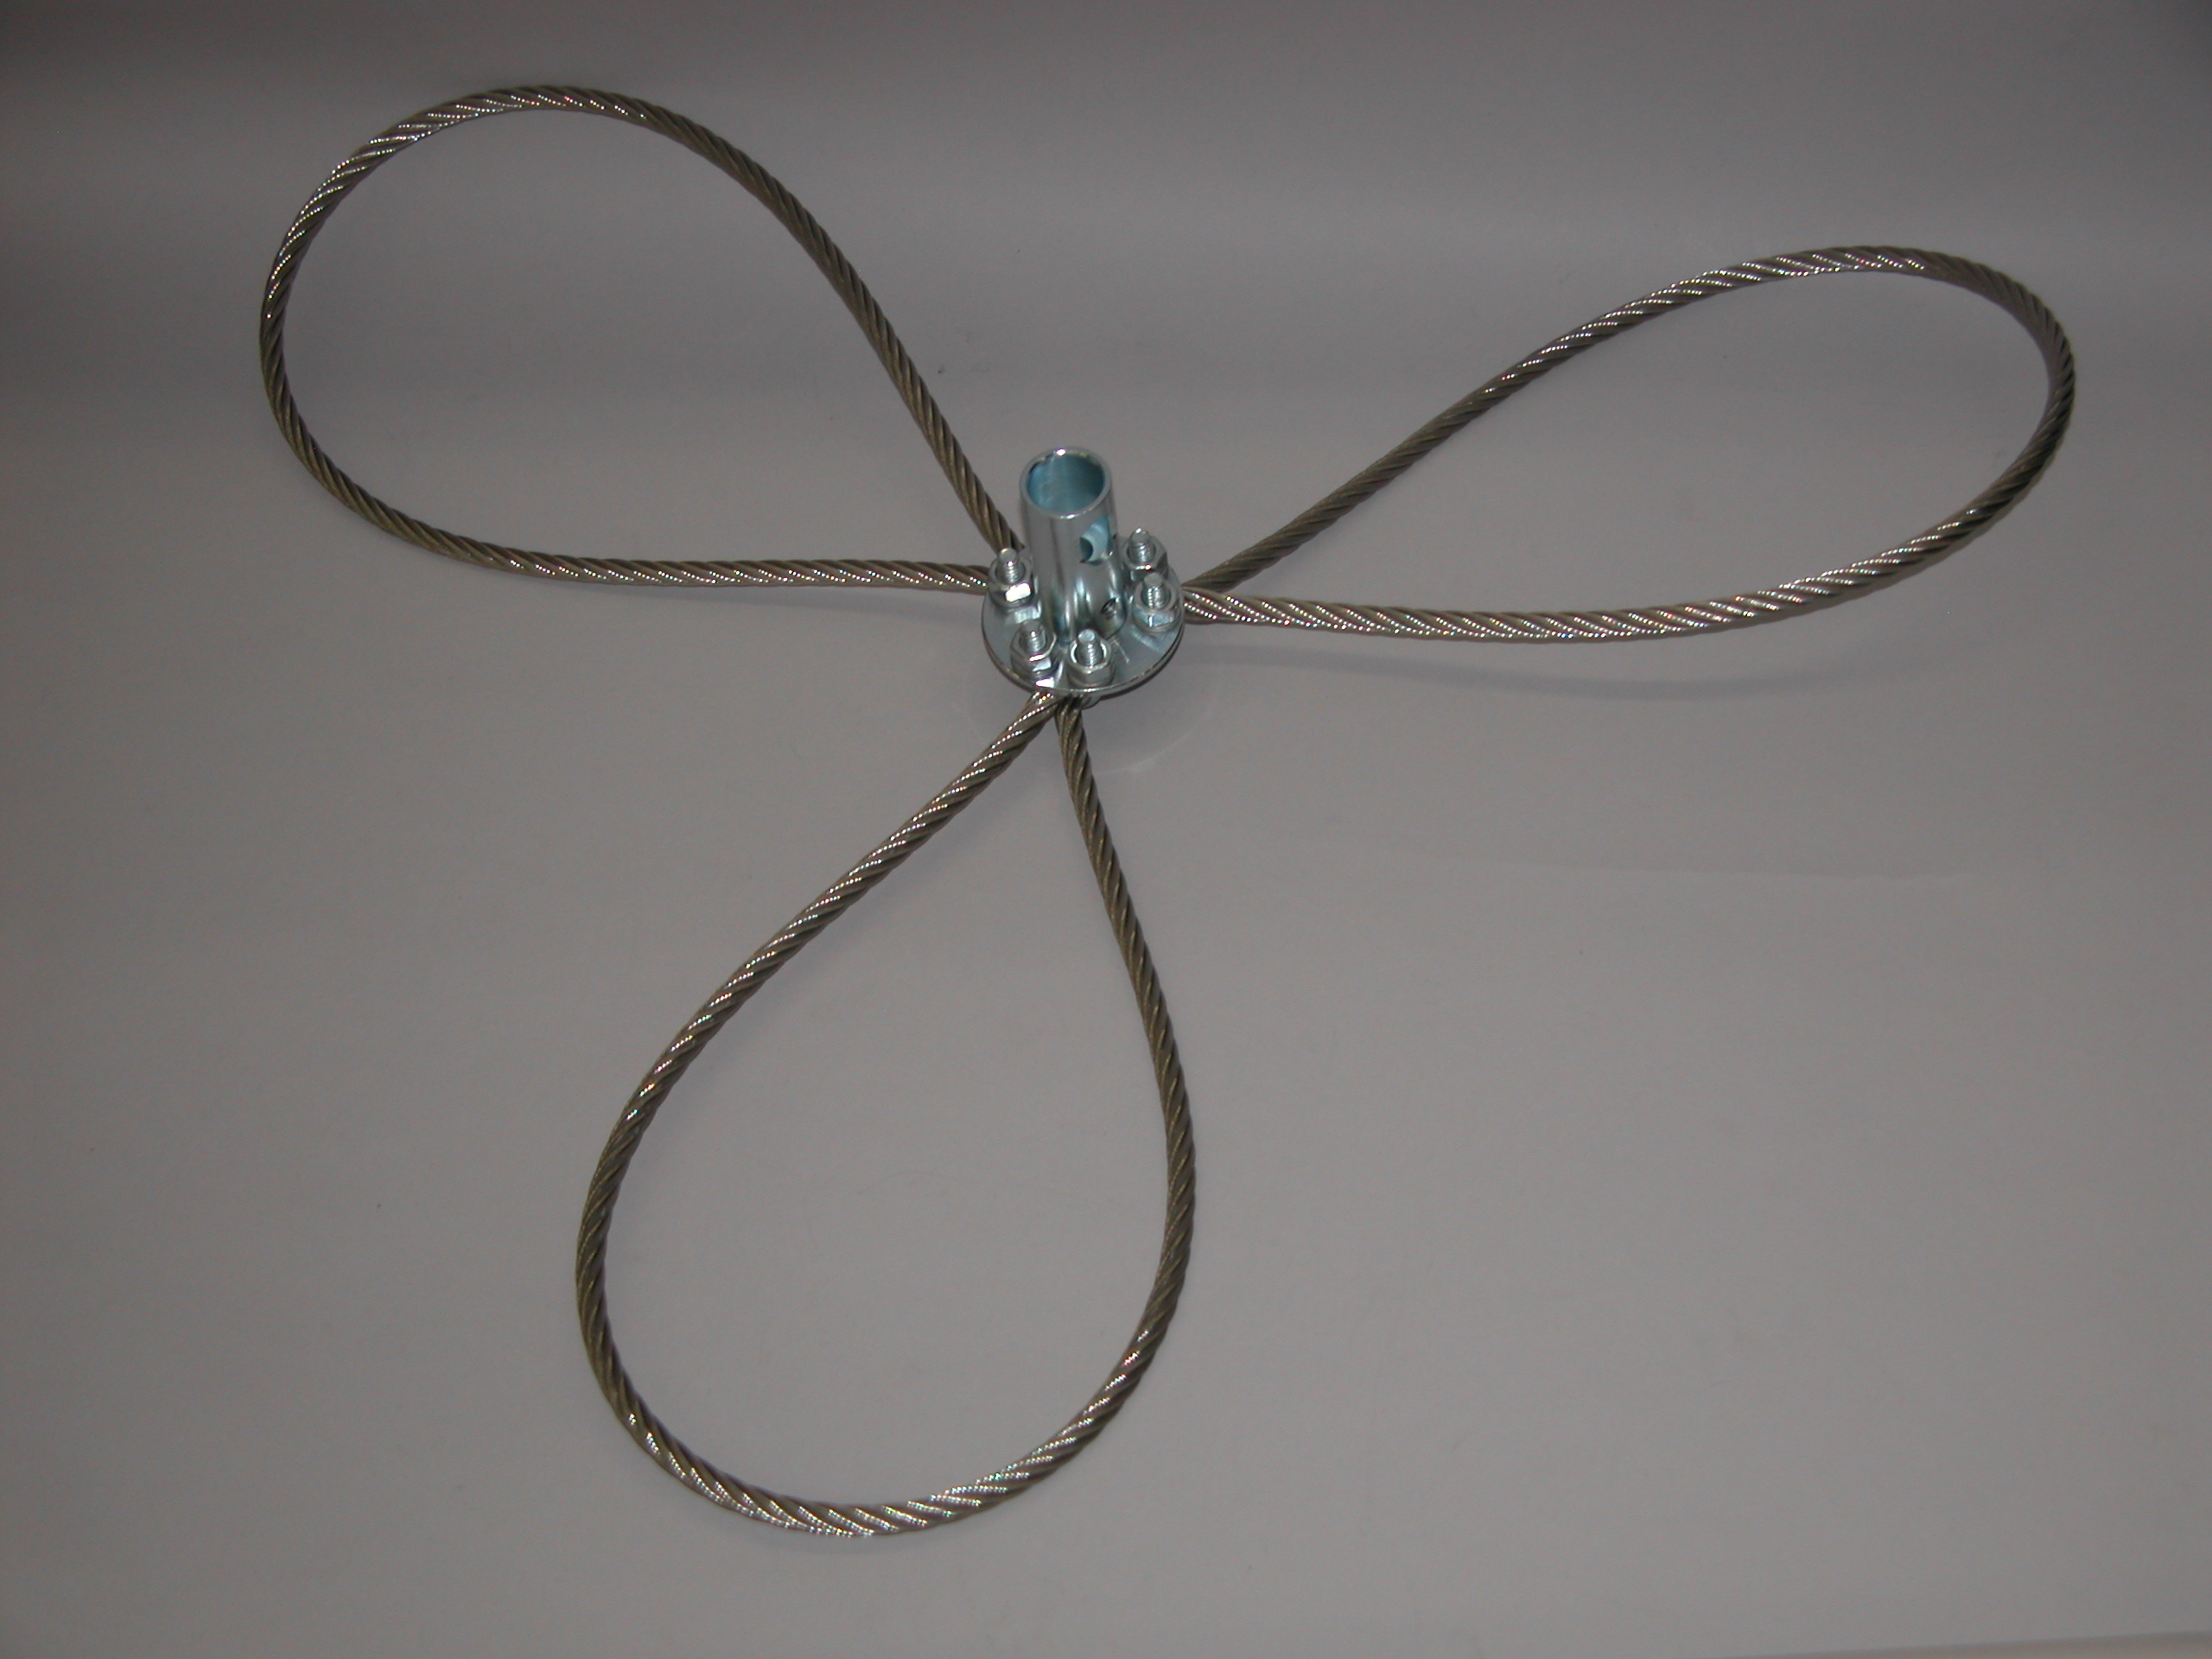 7257 X-Large Cable Loop Whip, 30" diameter